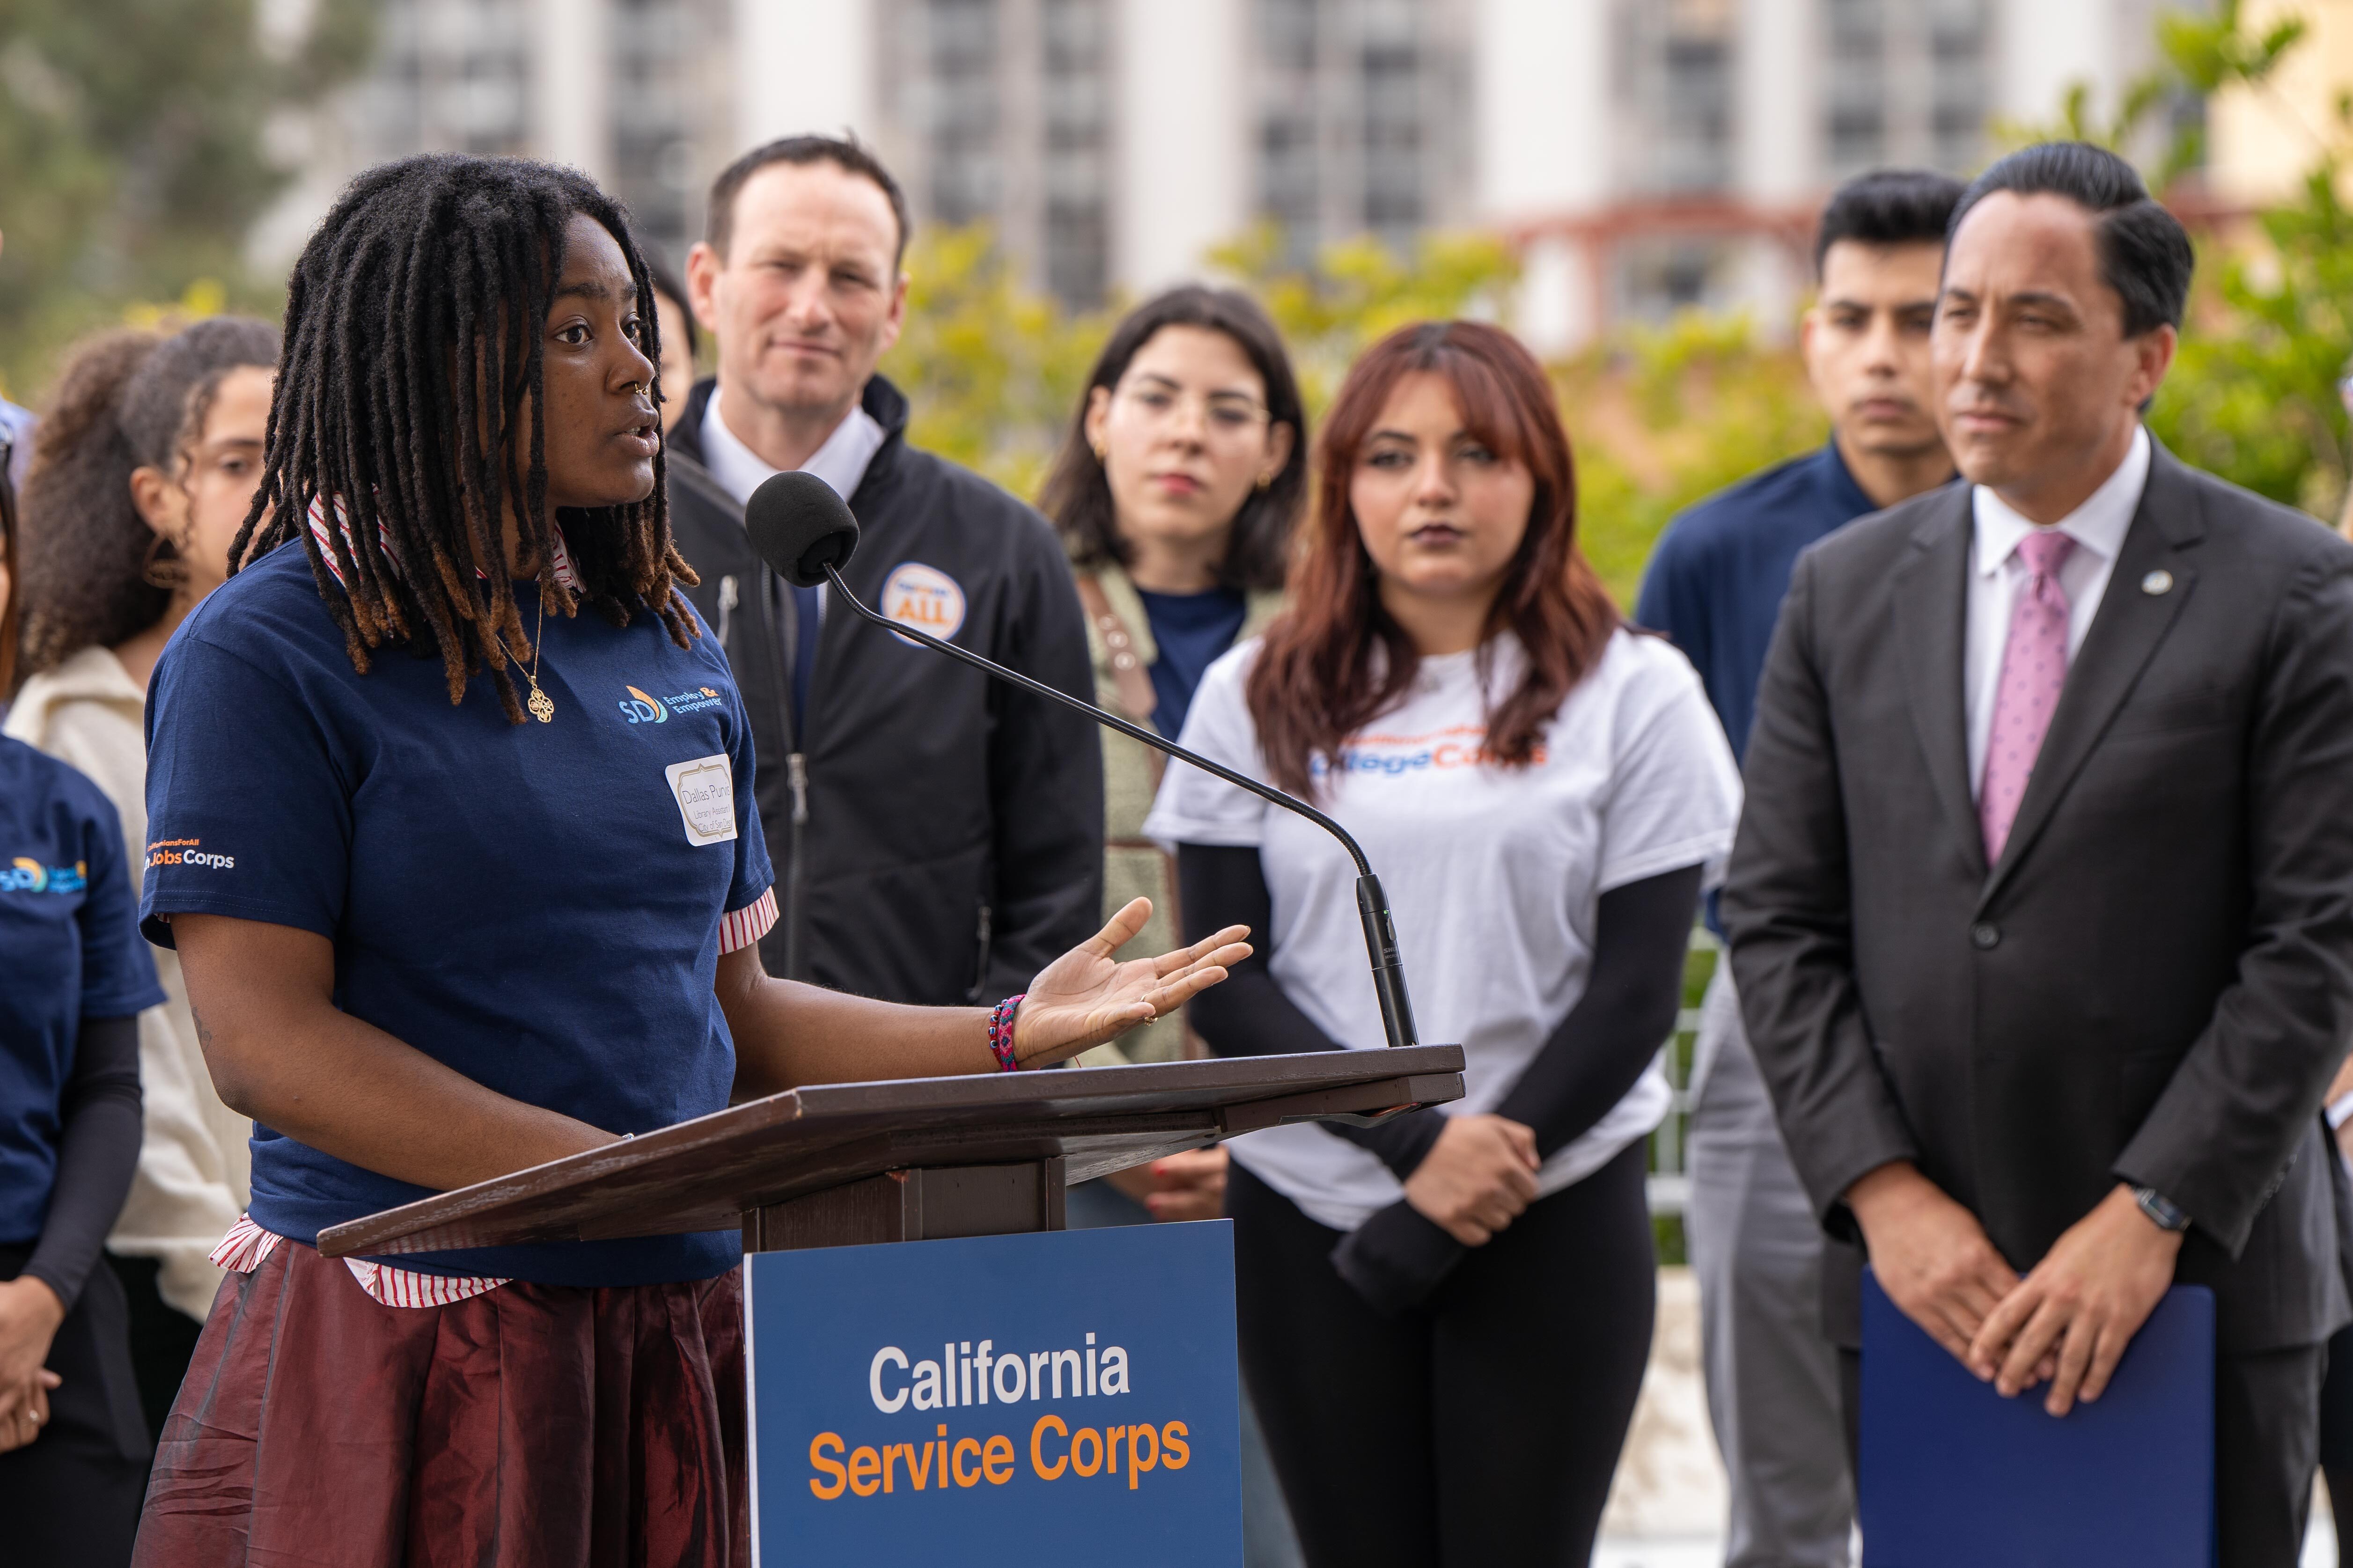 #CaliforniansForAll Youth Jobs Corps alumna Dallas Purvis shares her experience of how the California Service Corps has positively impacted her life and enabled her to make meaningful contributions to her community in San Diego.